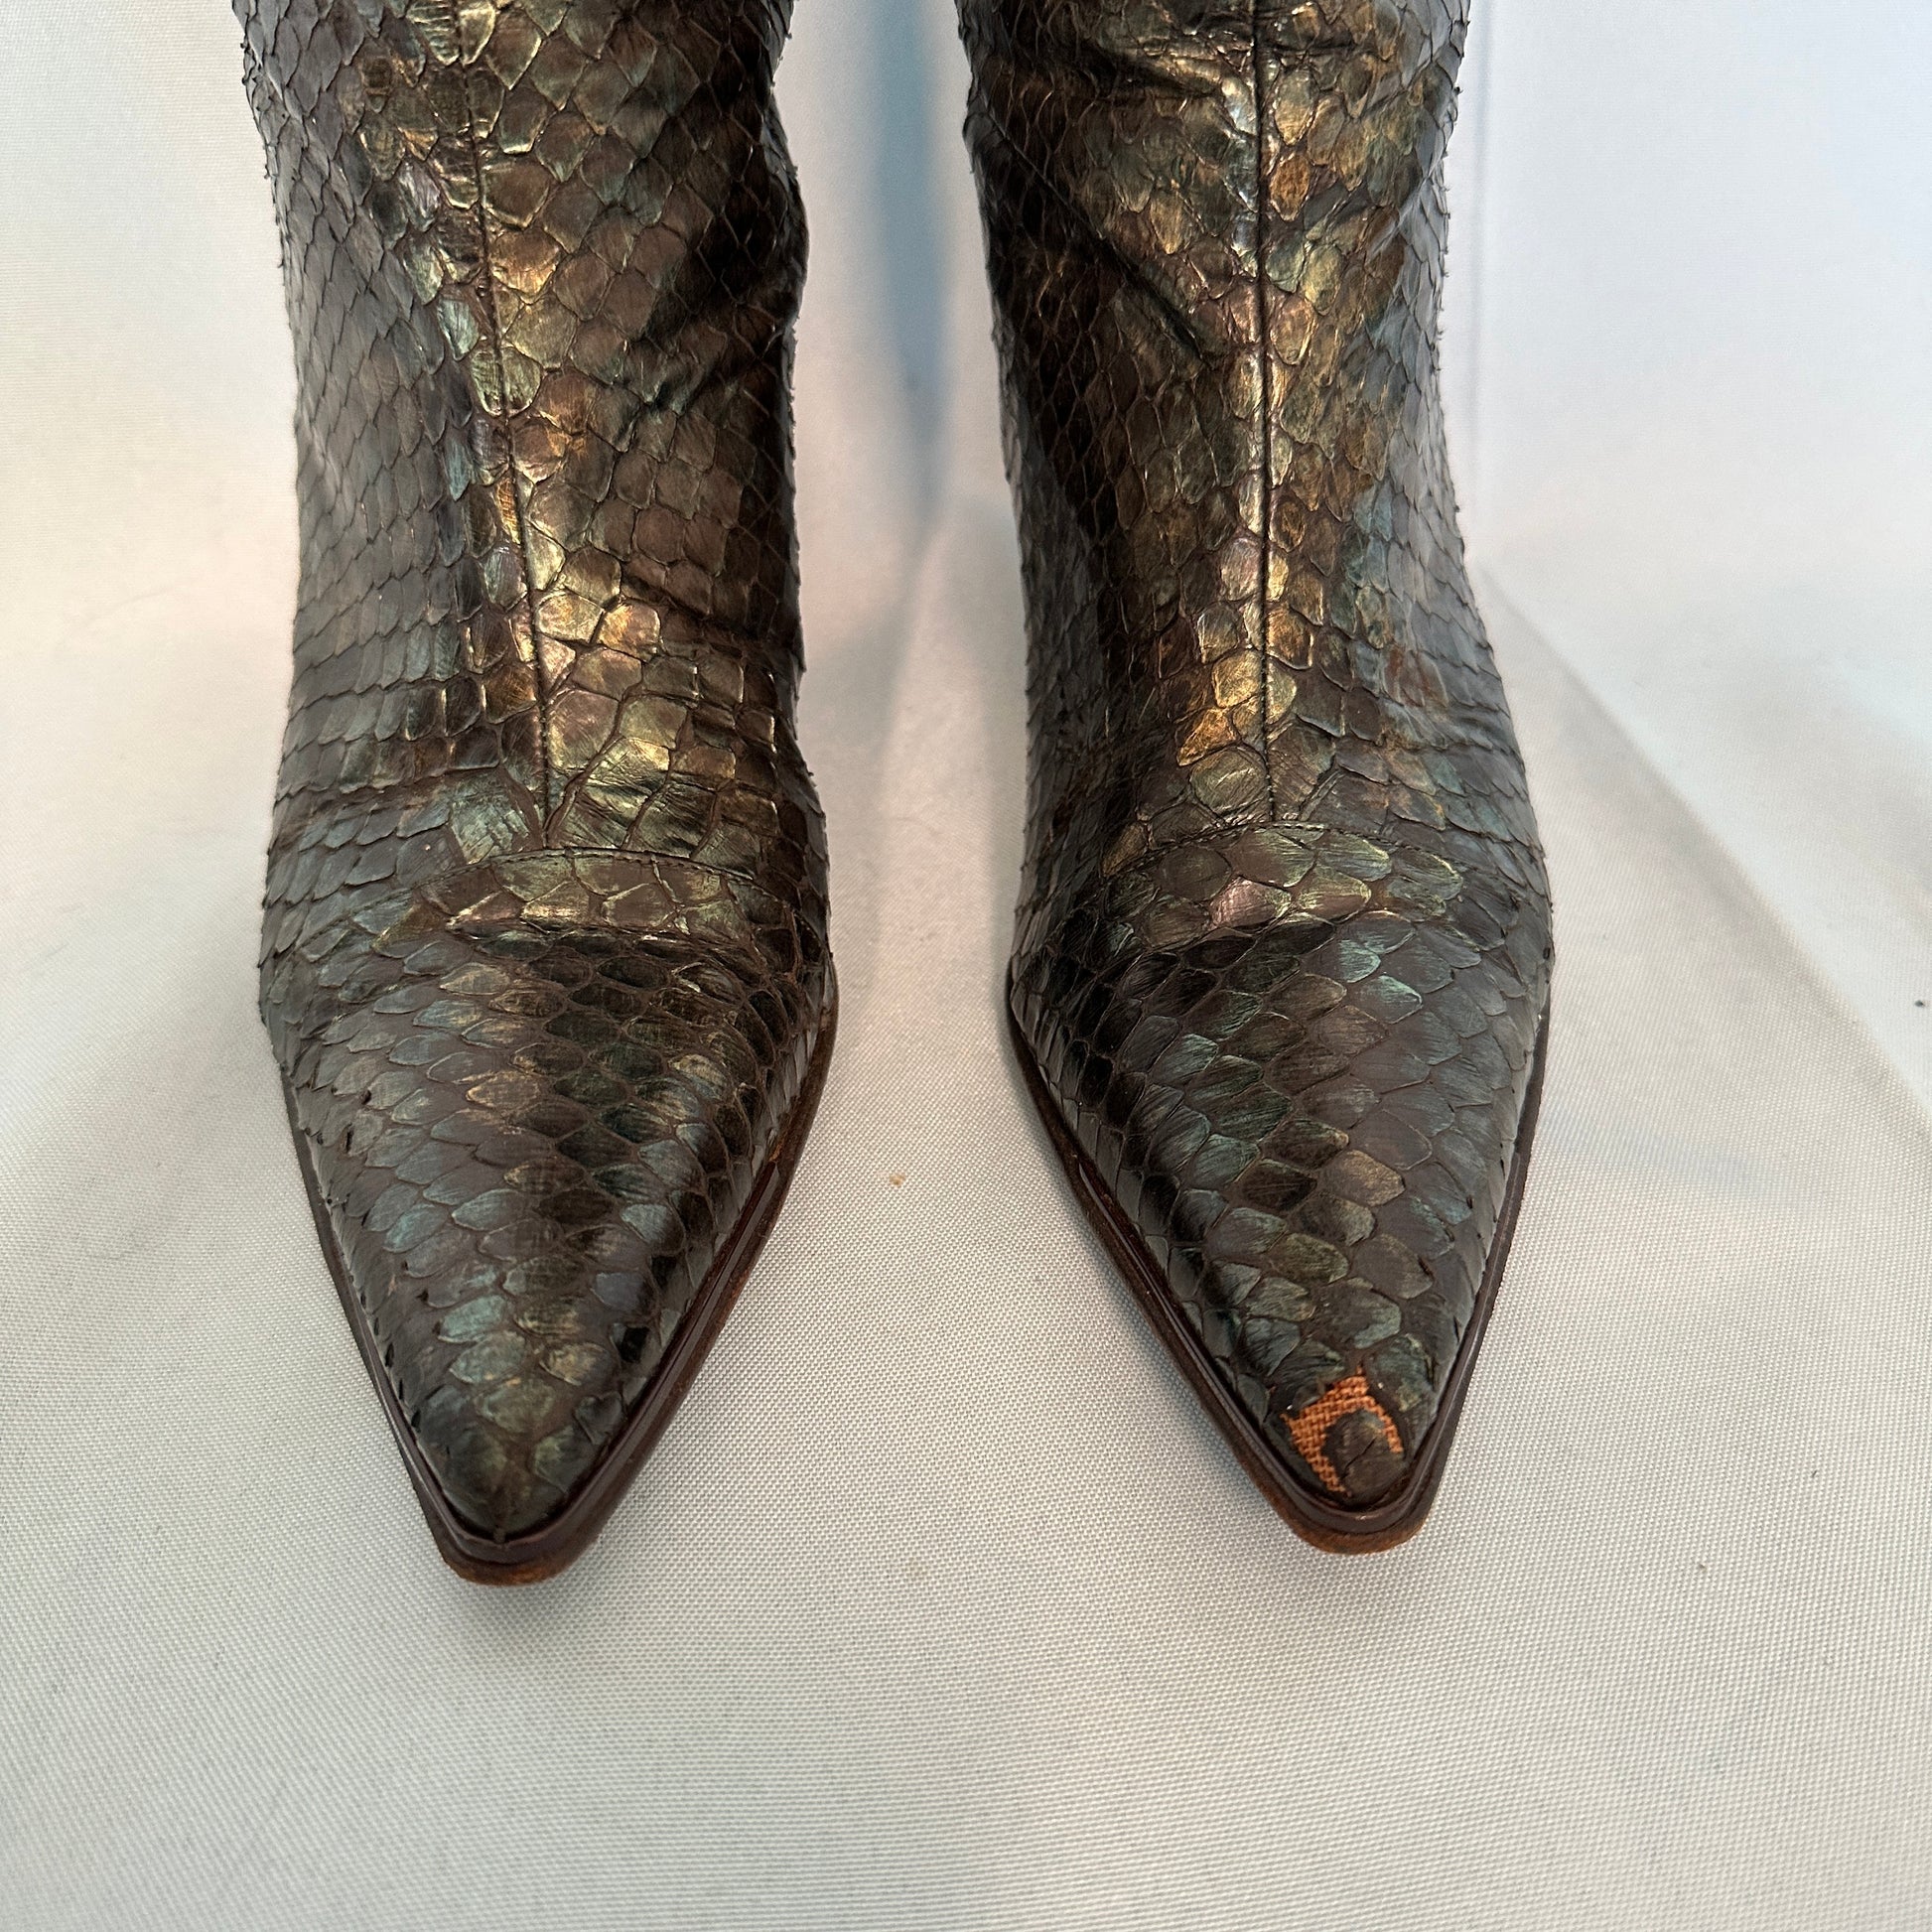 GUCCI Tom Ford Mens-Red-Python-Leather-Cowboy-Boots Spring/Summer